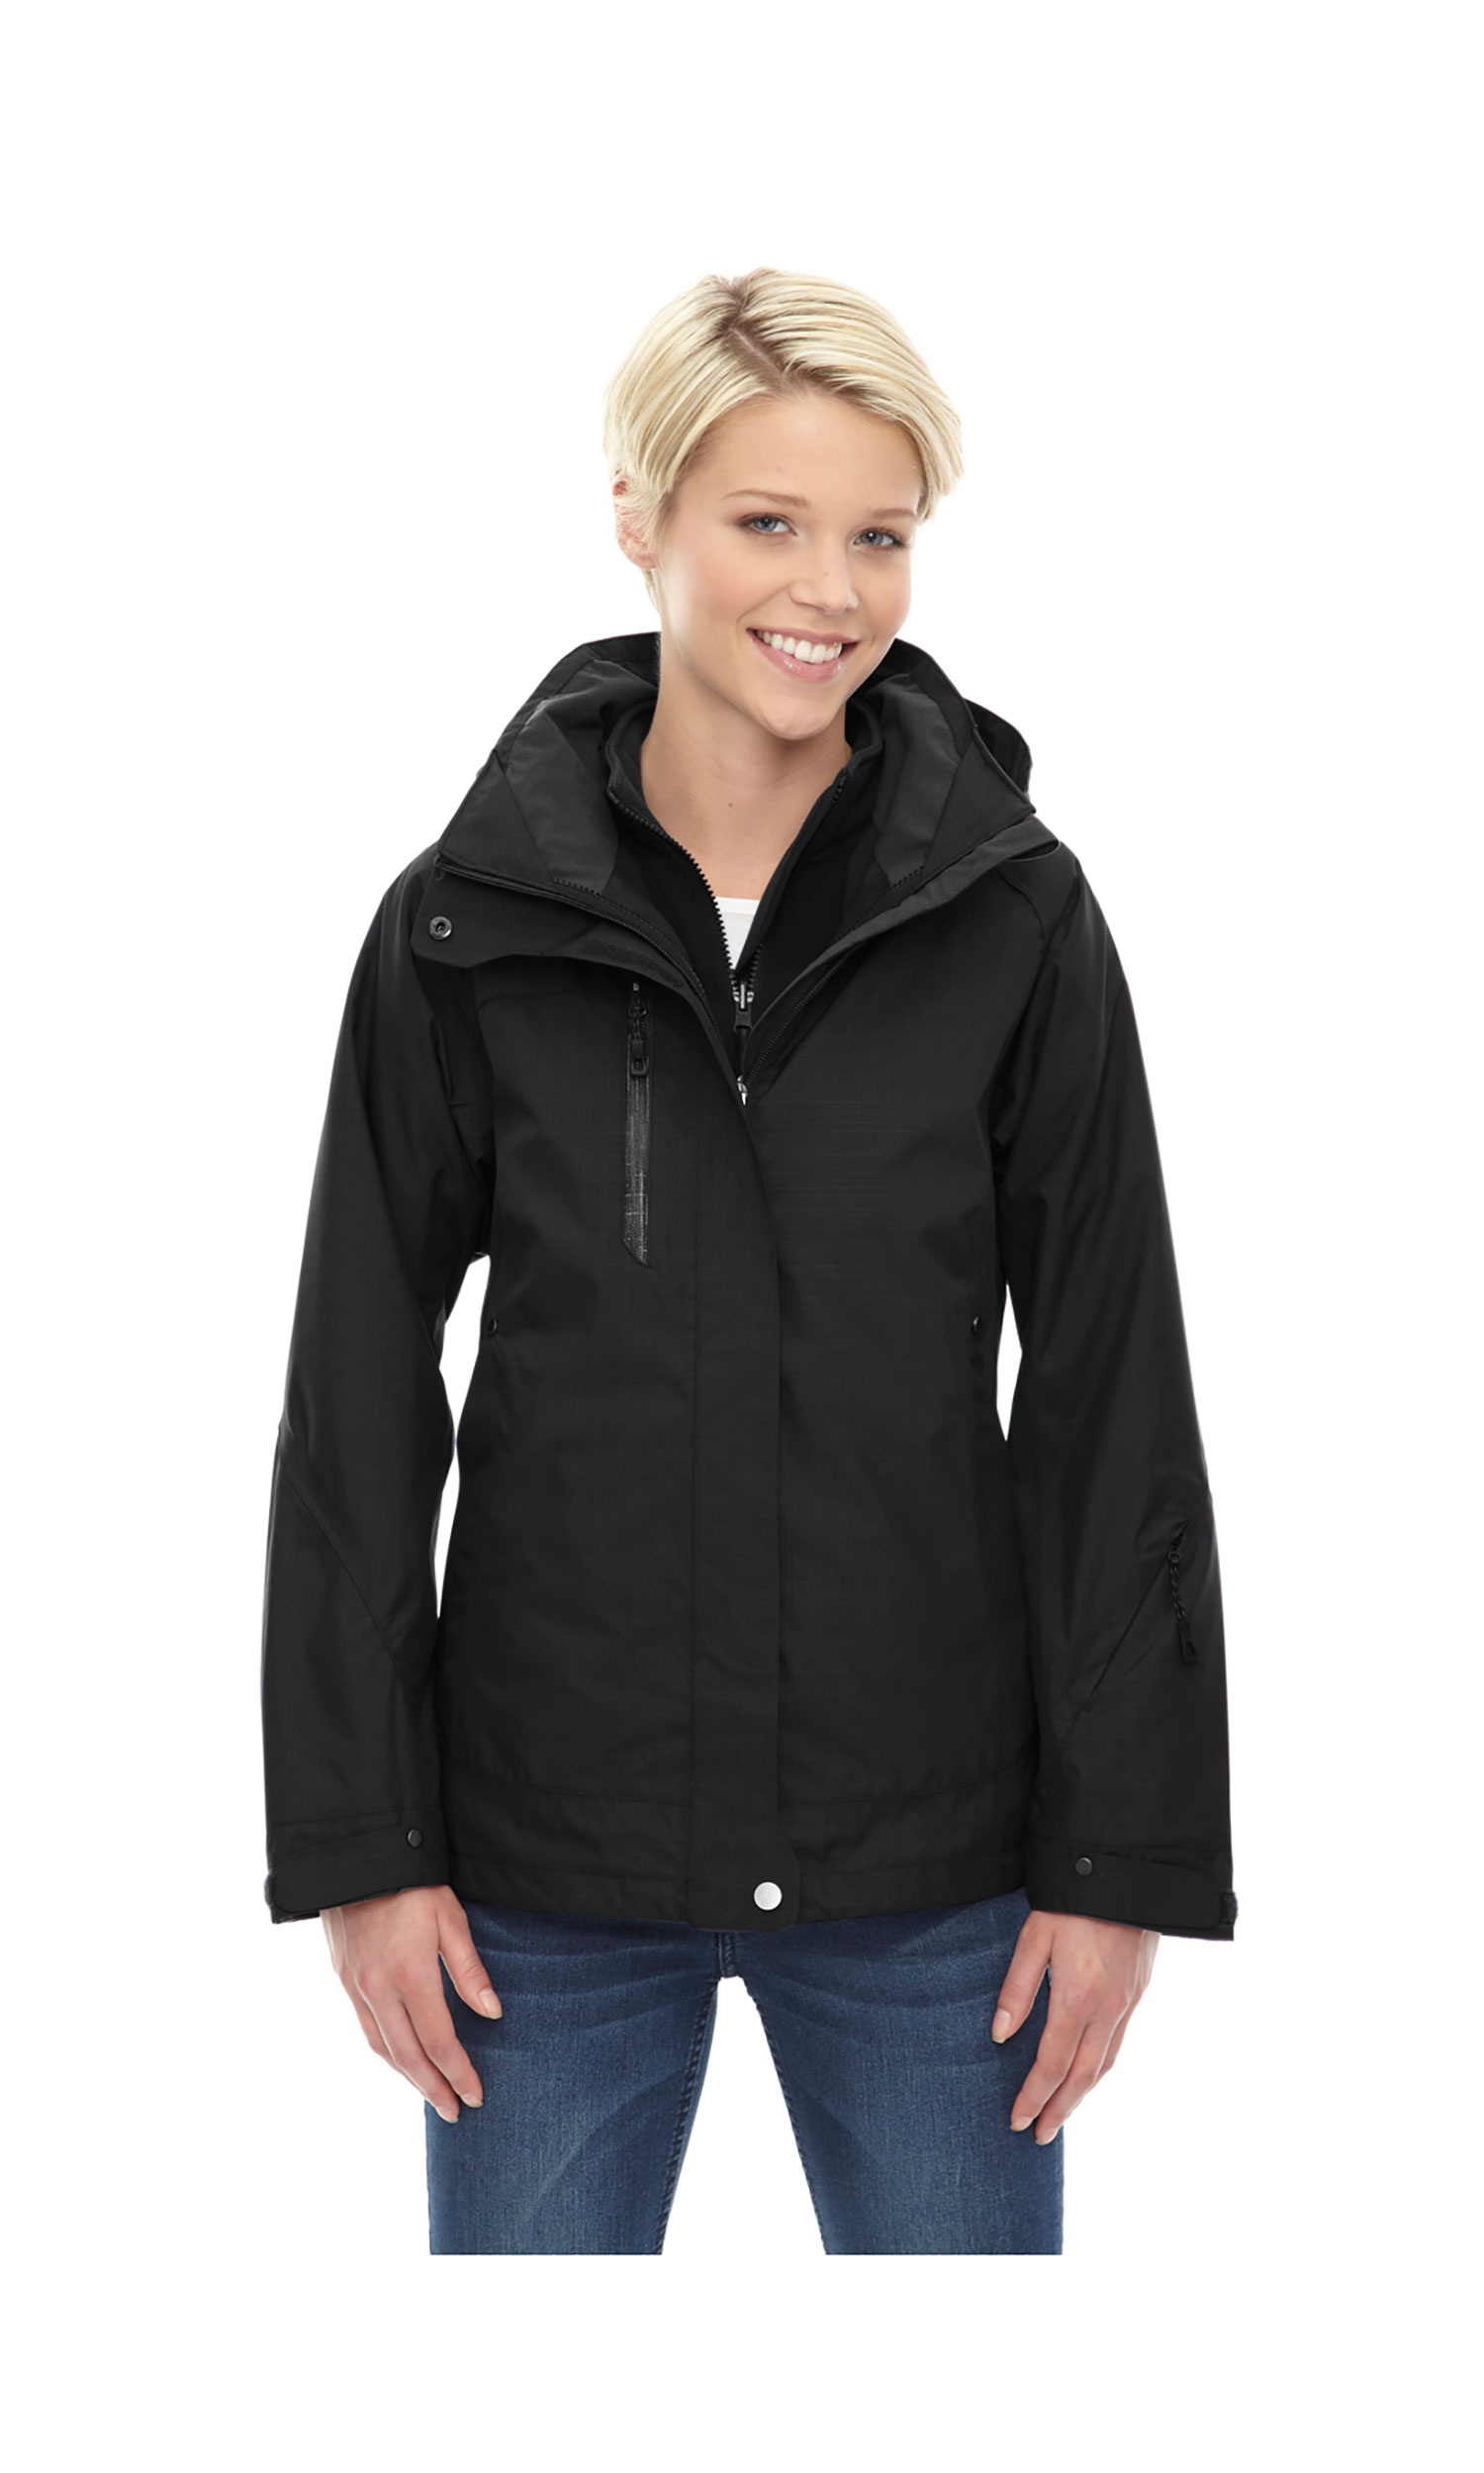 North End Women's 3-In-1 Soft Shell Liner Jacket, Style 78178 - image 1 of 1